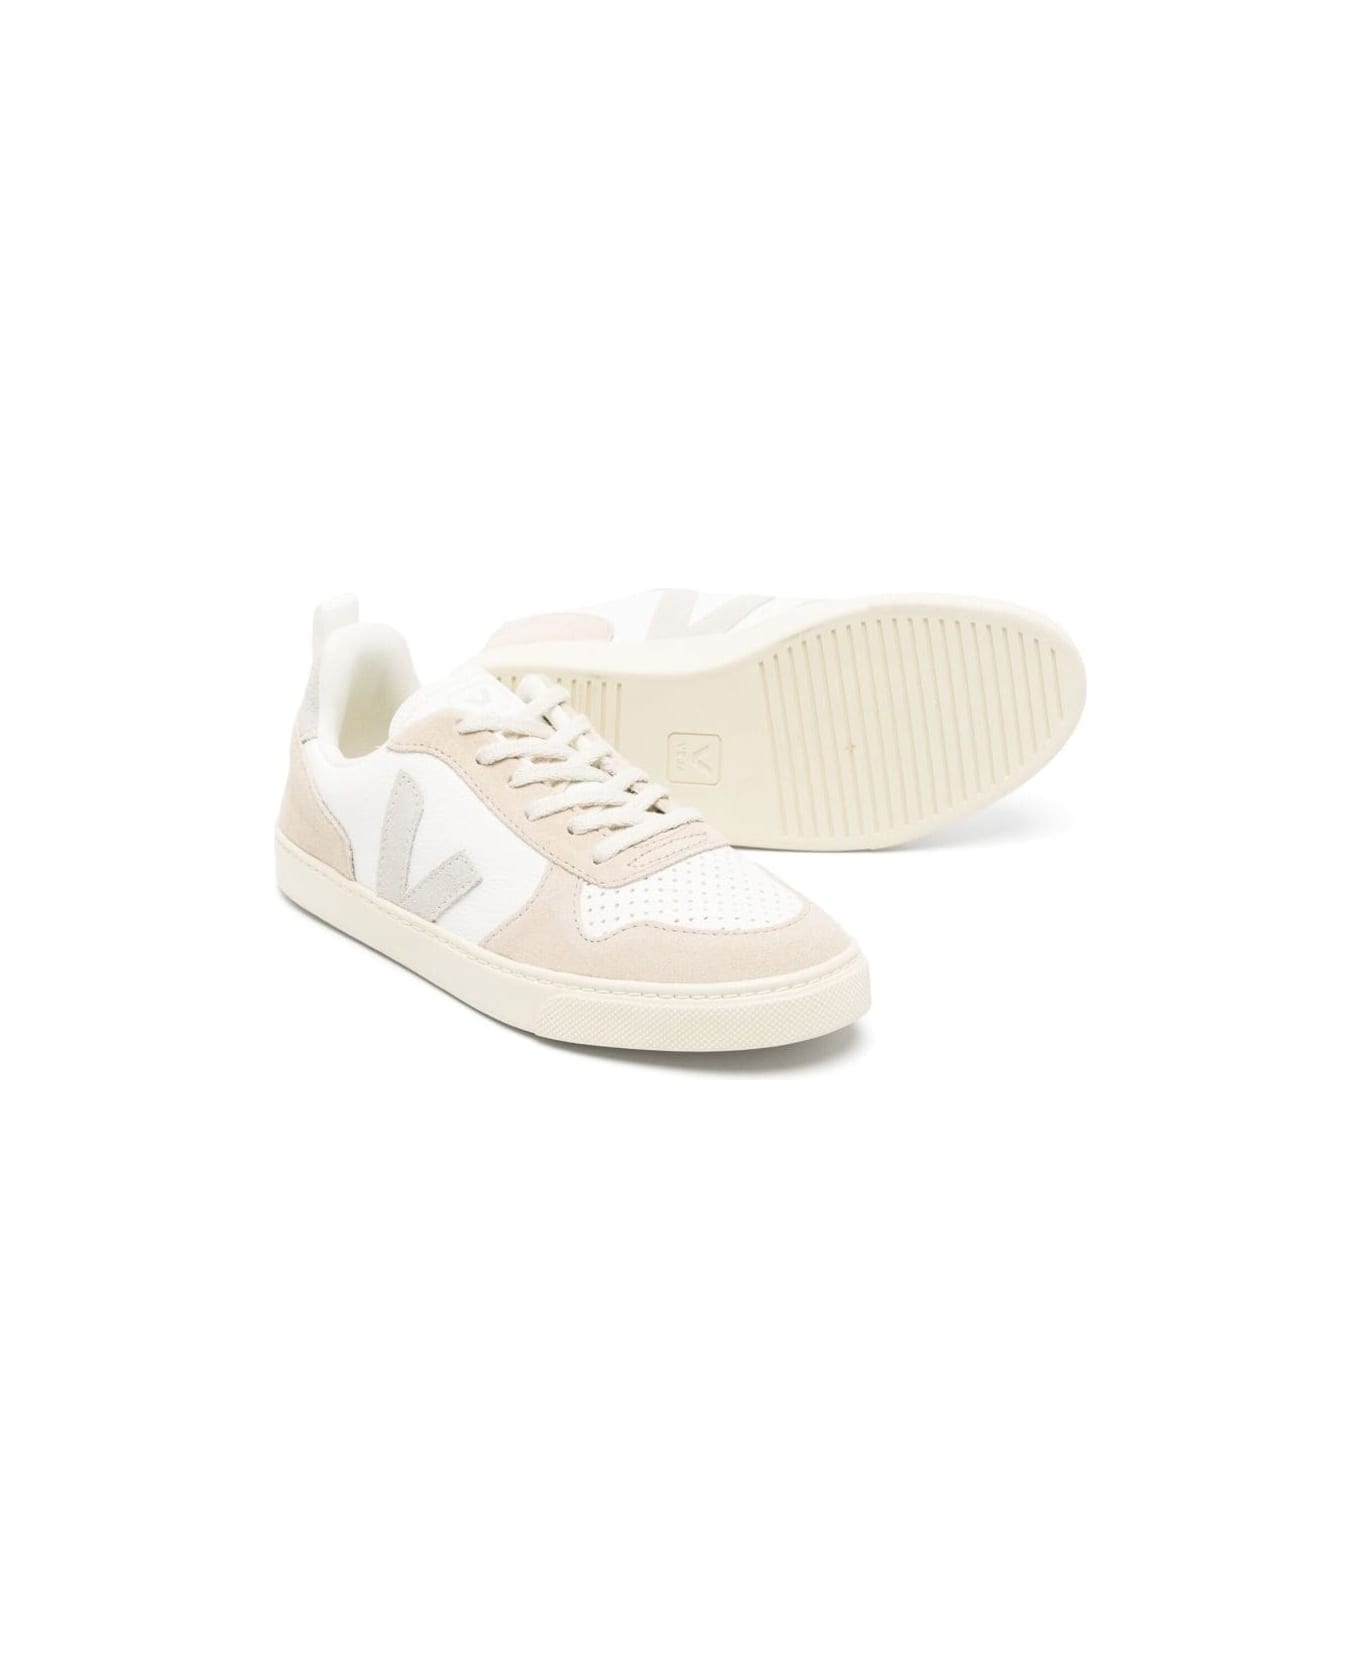 Veja White Sneaker With Pink Inserts In Leather Boy - White